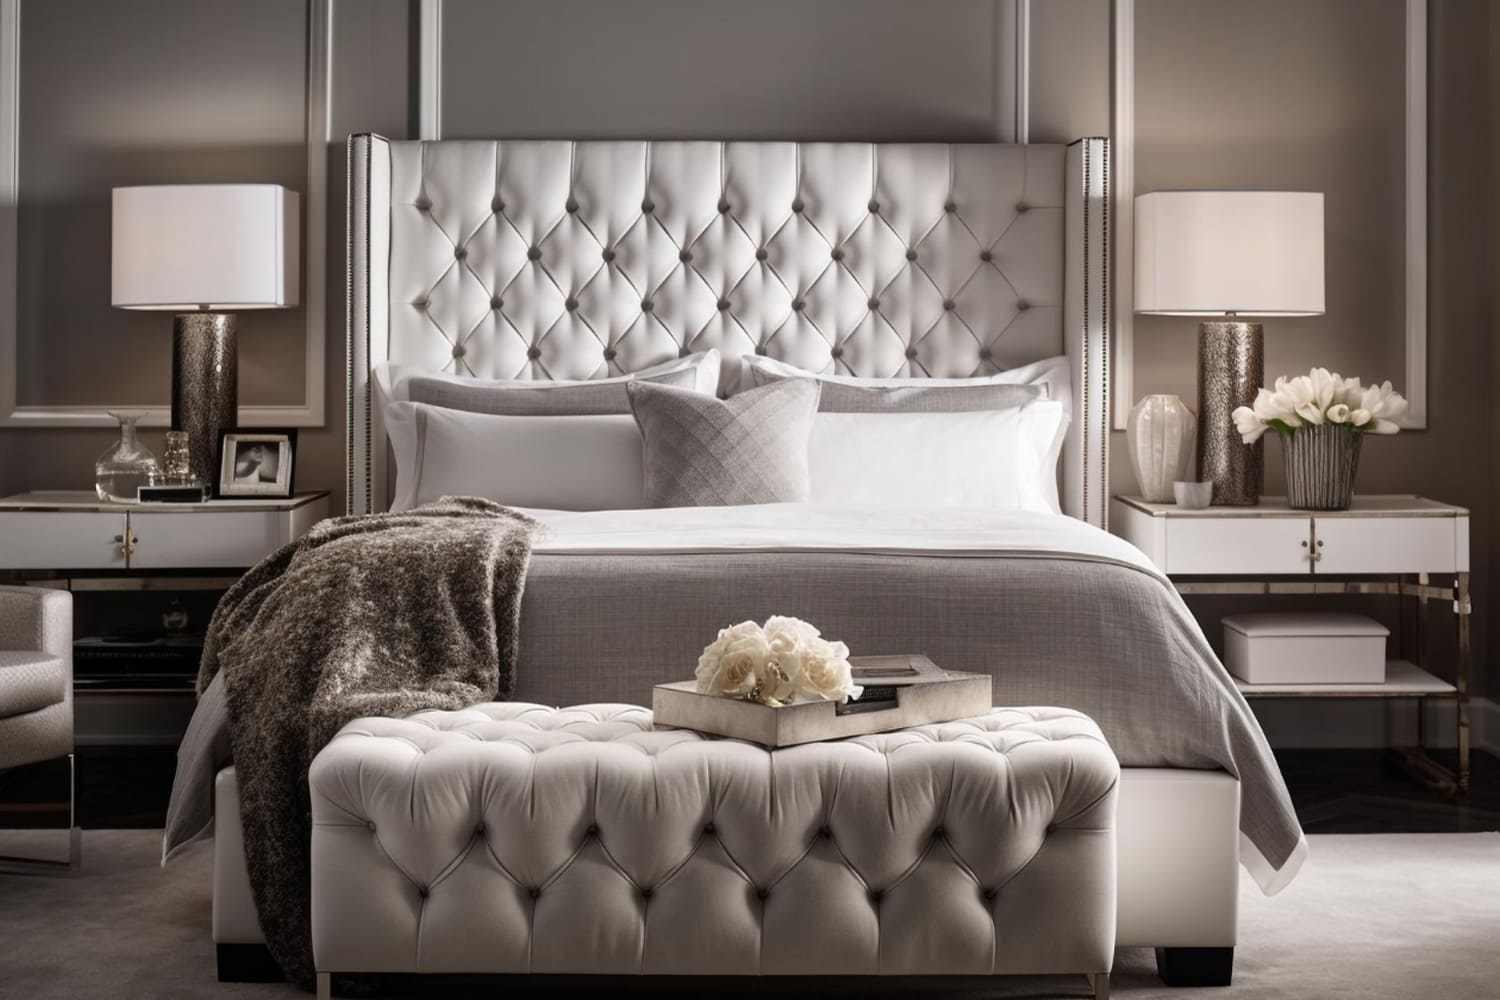 Expert designers in Hyderabad elevate this centerpiece with custom-white headboards, sumptuous bedding, and a symphony of white lanterns, creating a cocoon of comfort and style